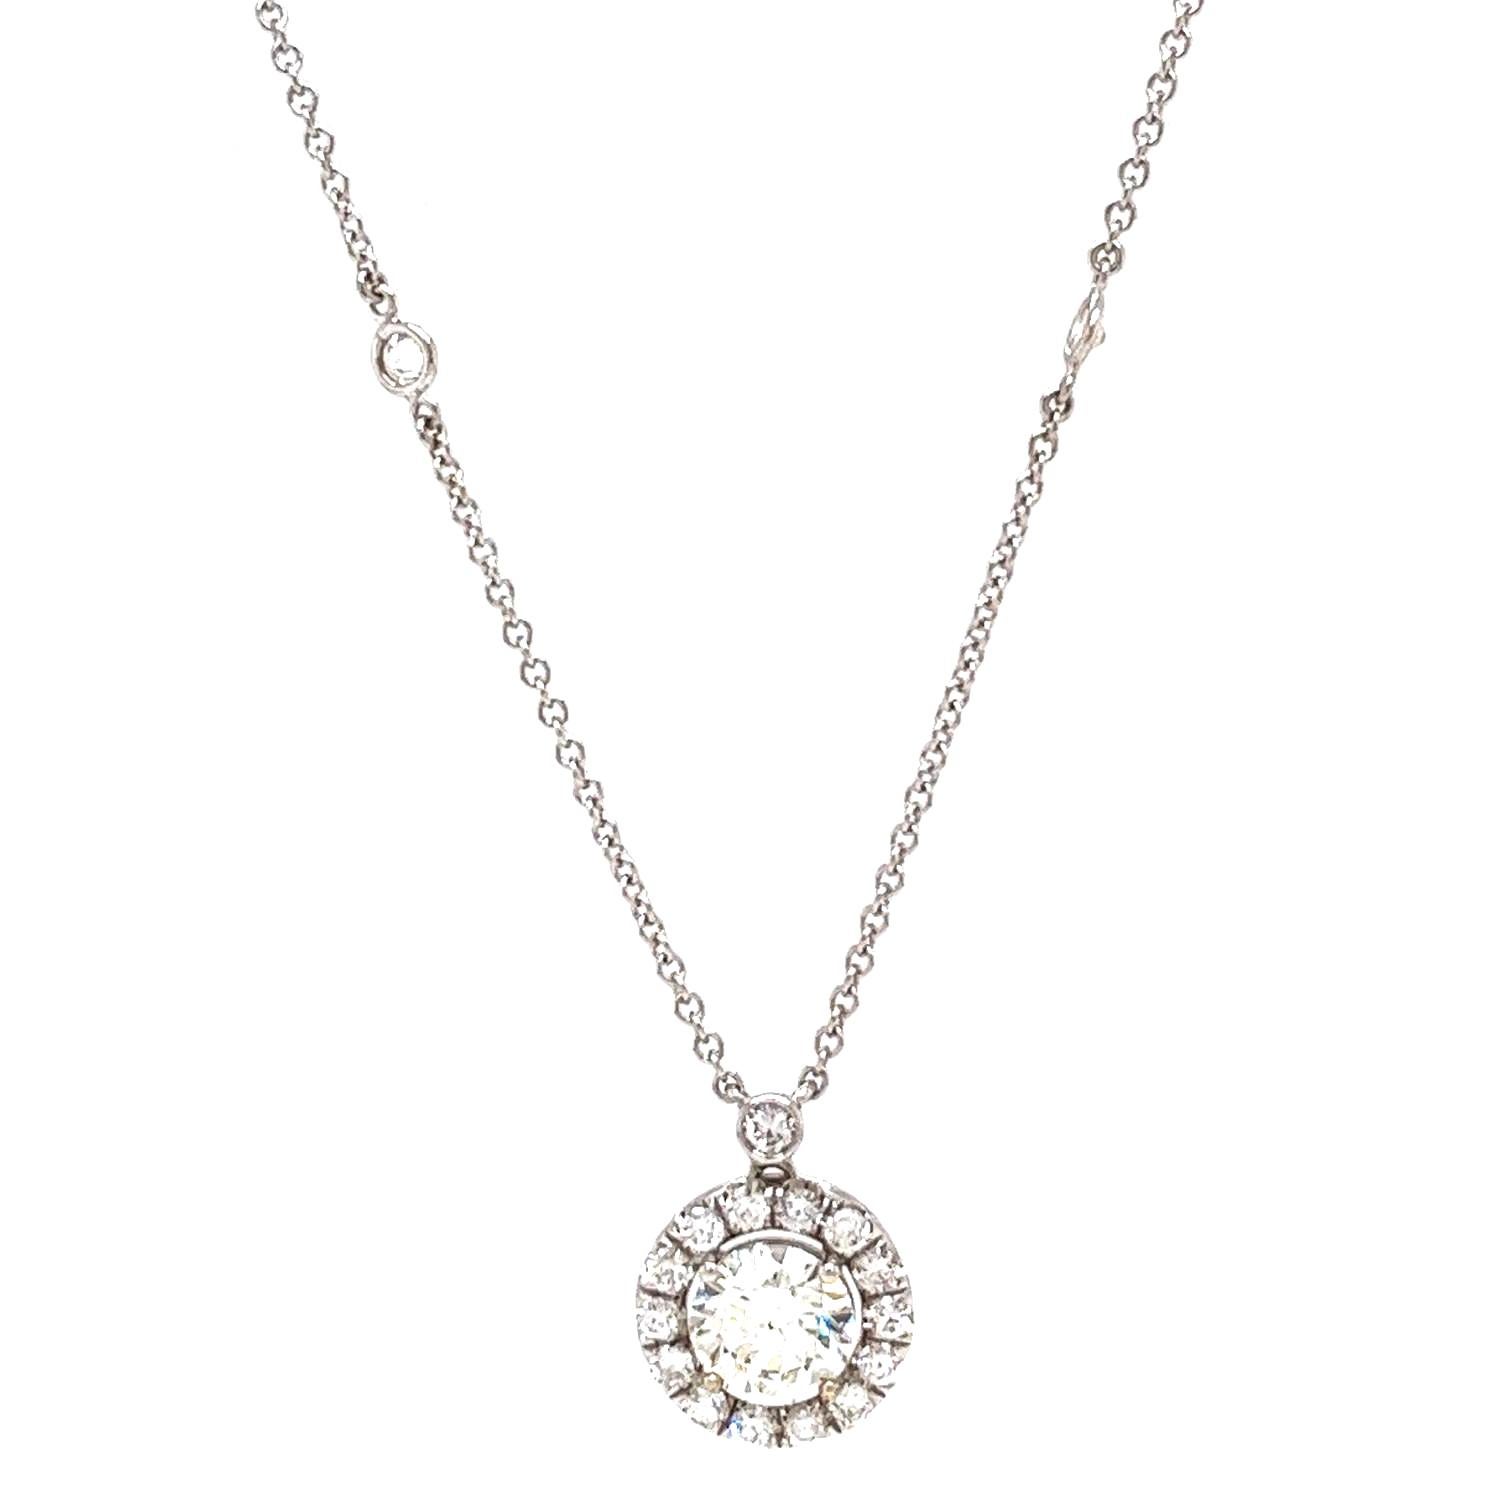 Modernist 3.35ct Natural Round Diamond Halo Pendant Station Necklace in 14K White Gold For Sale